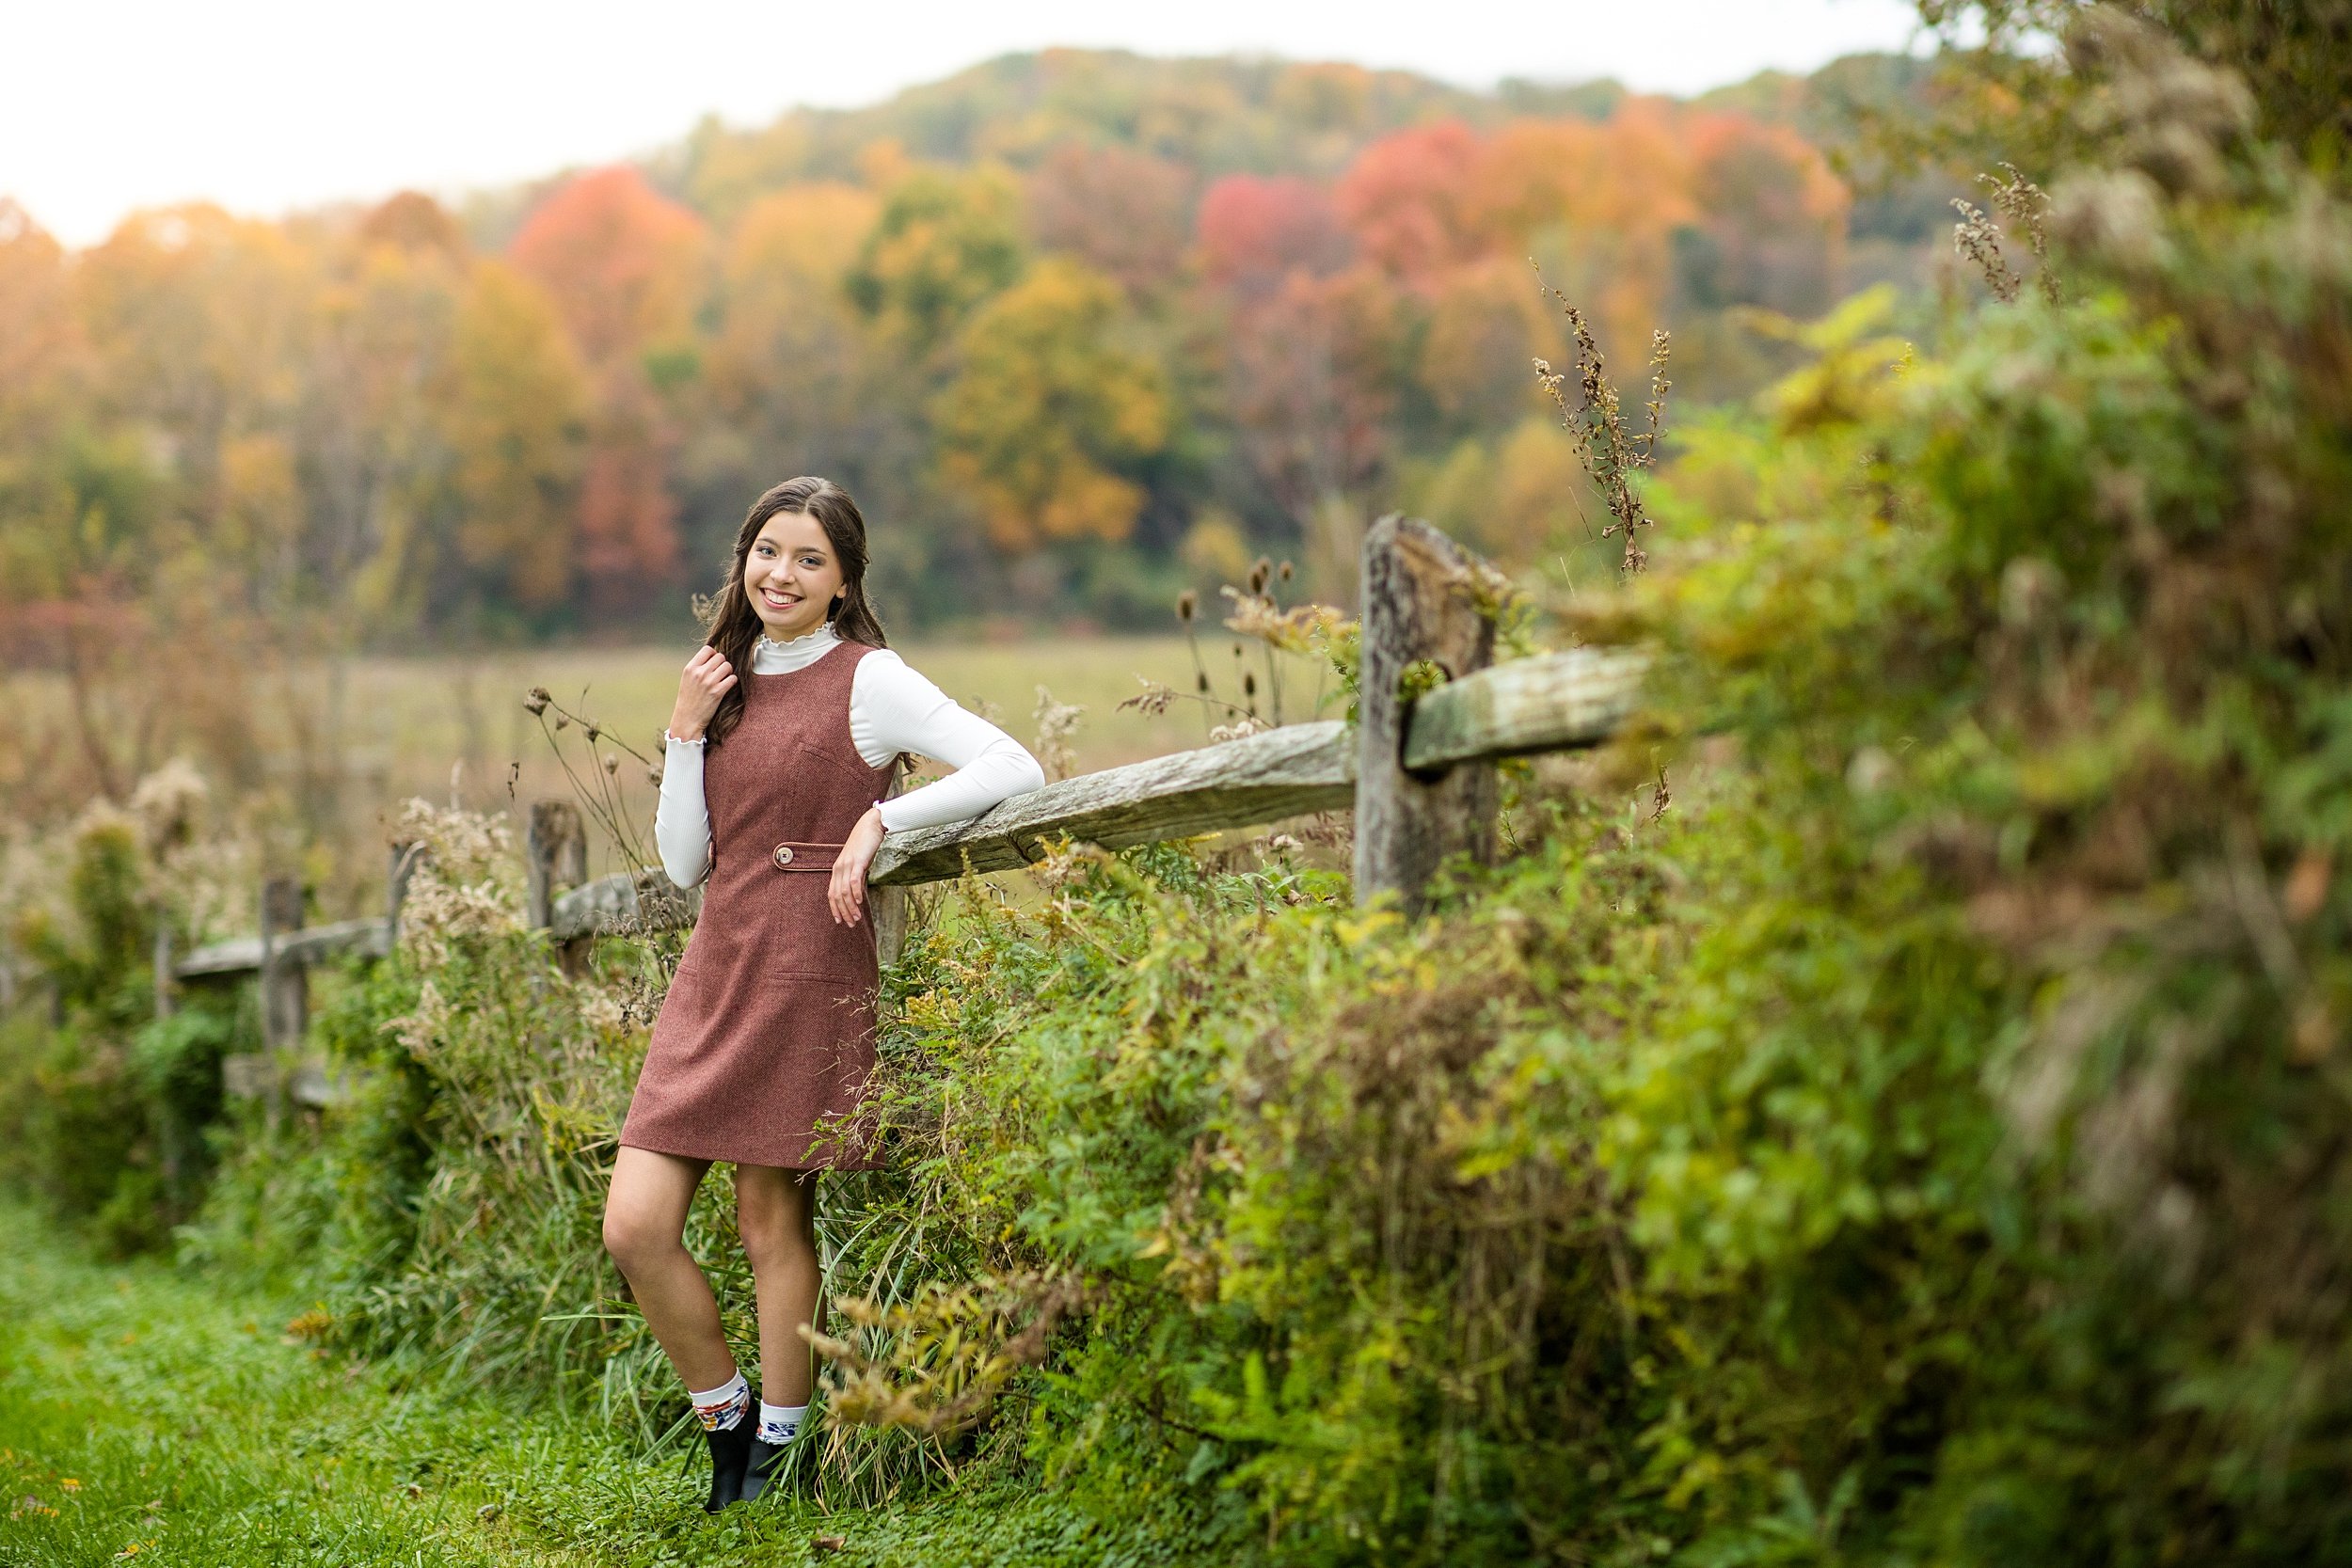 butler county senior photo locations, senior picture location ideas butler county, cranberry township senior photos, zelienople senior photos, mars senior photos, historic harmony senior photos